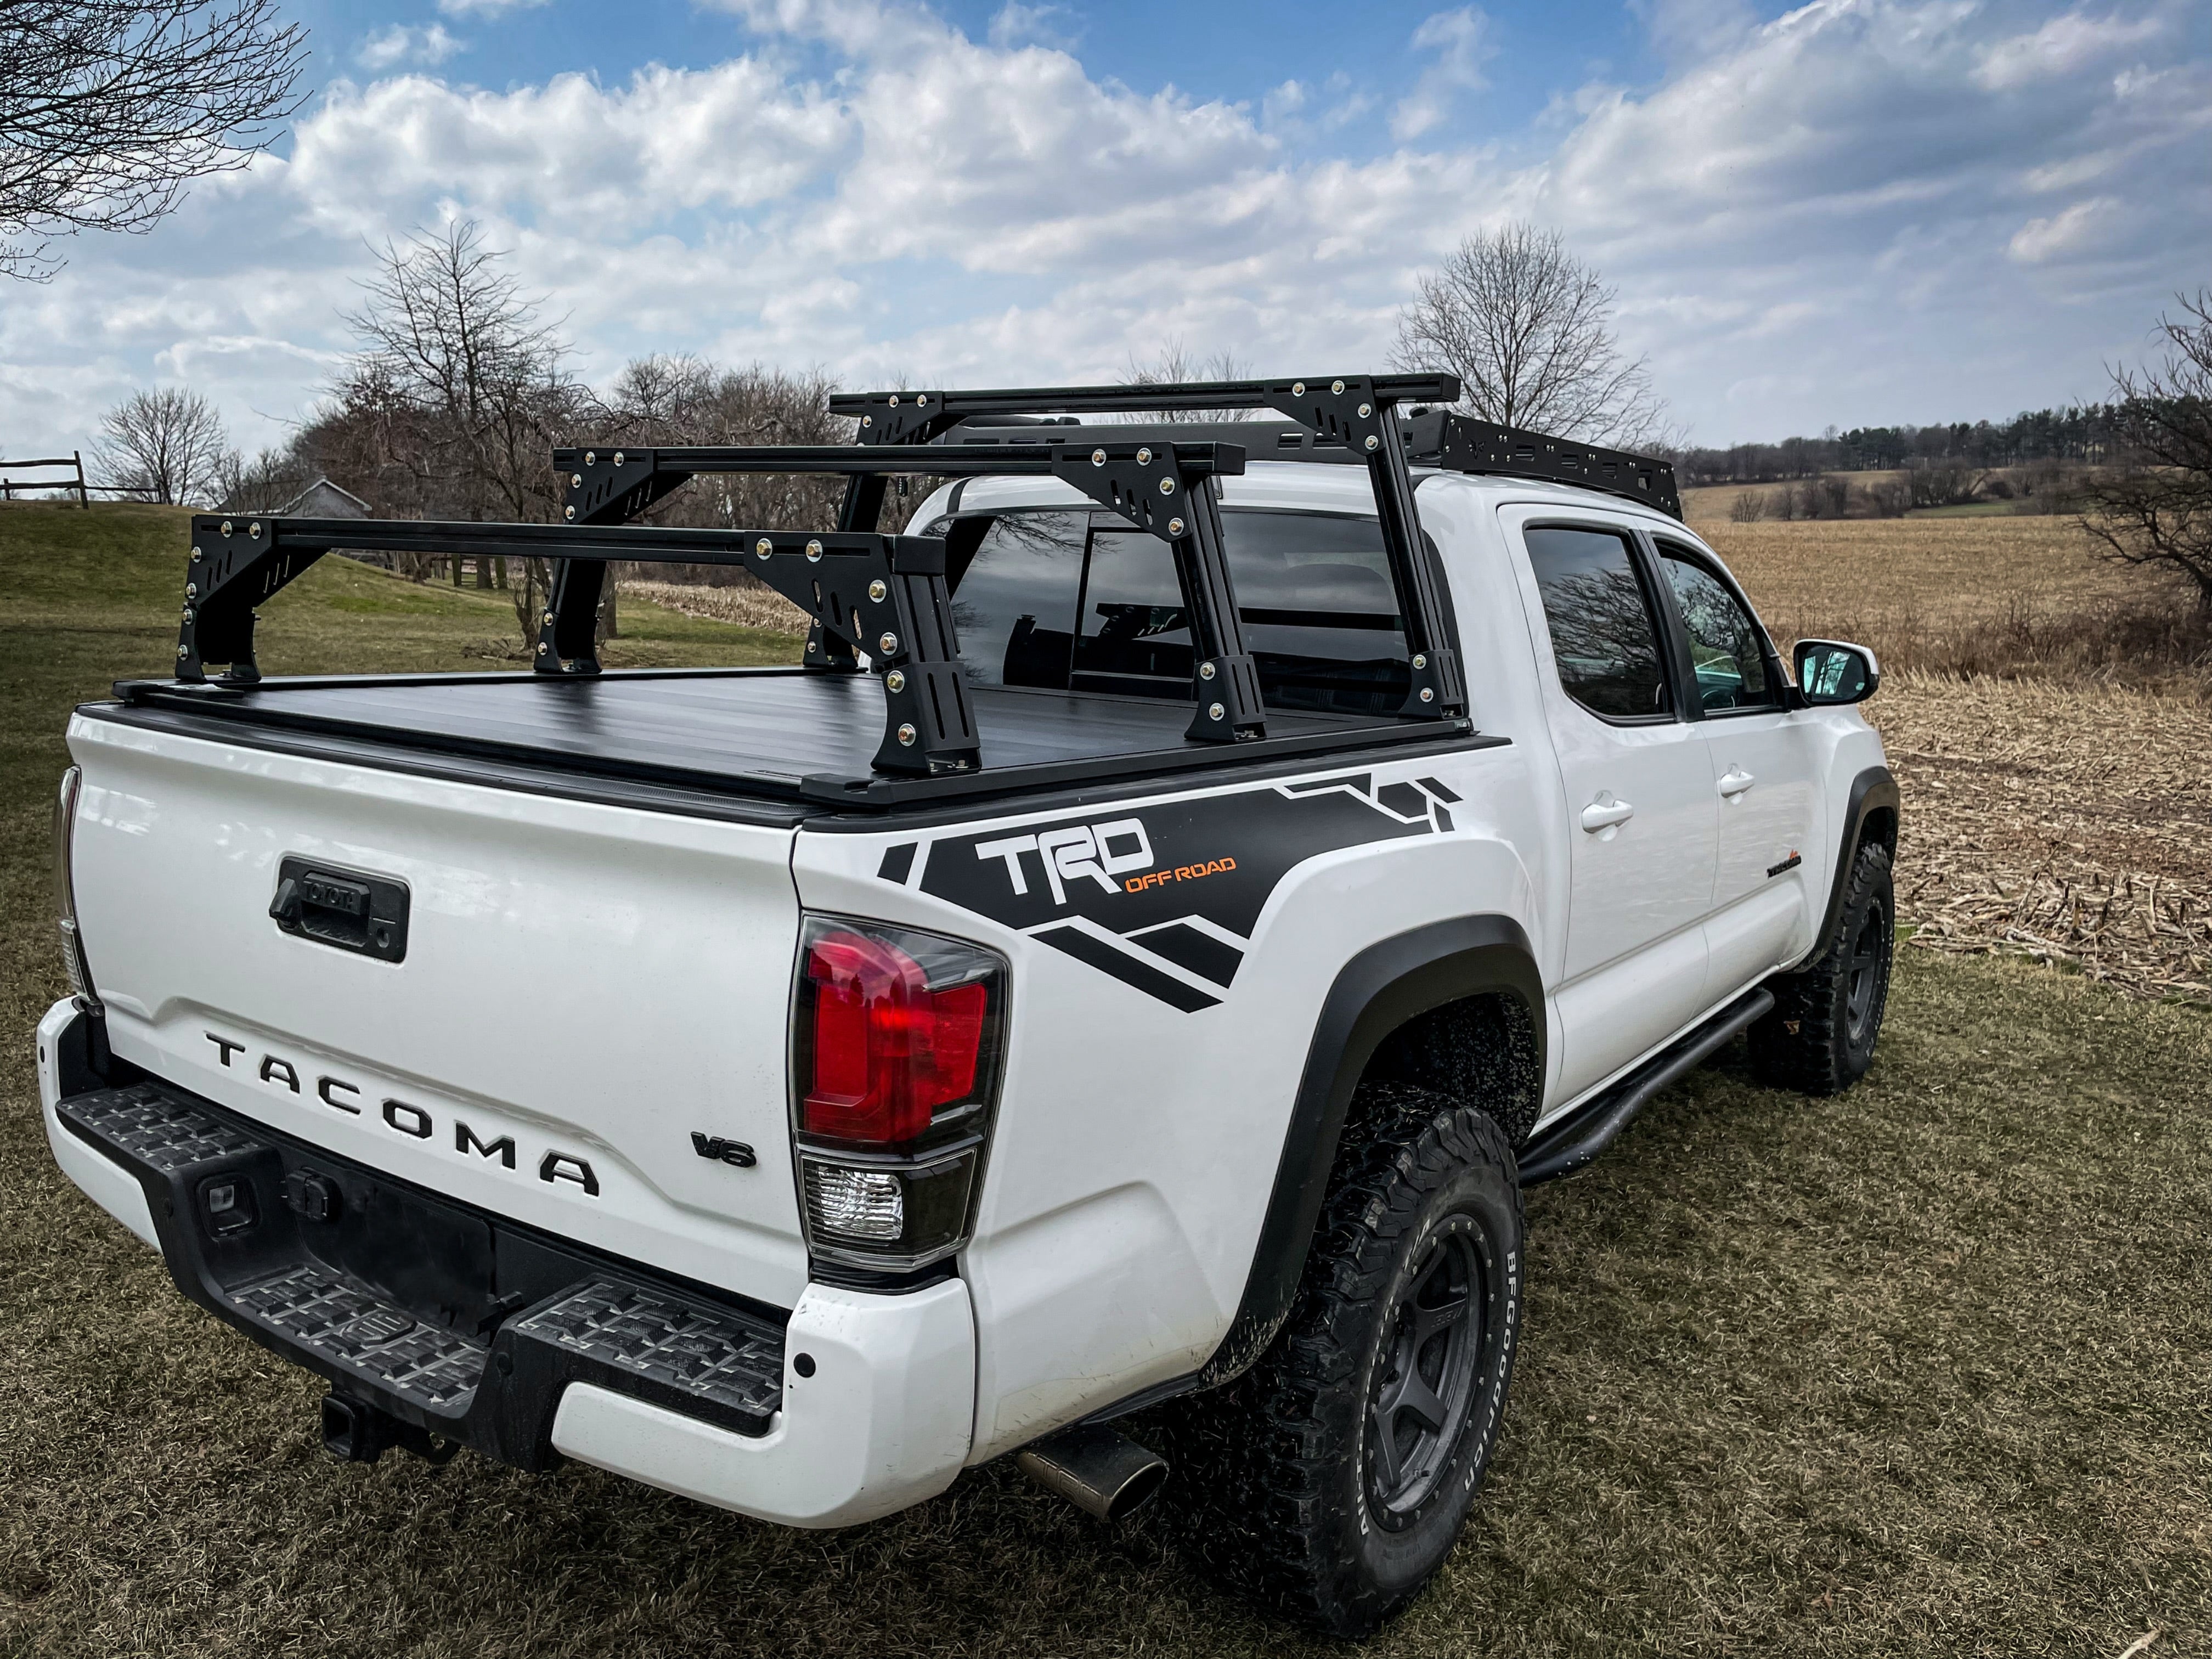 F150, F250, F350 - Bed Rack For Retractable Covers with T-slots